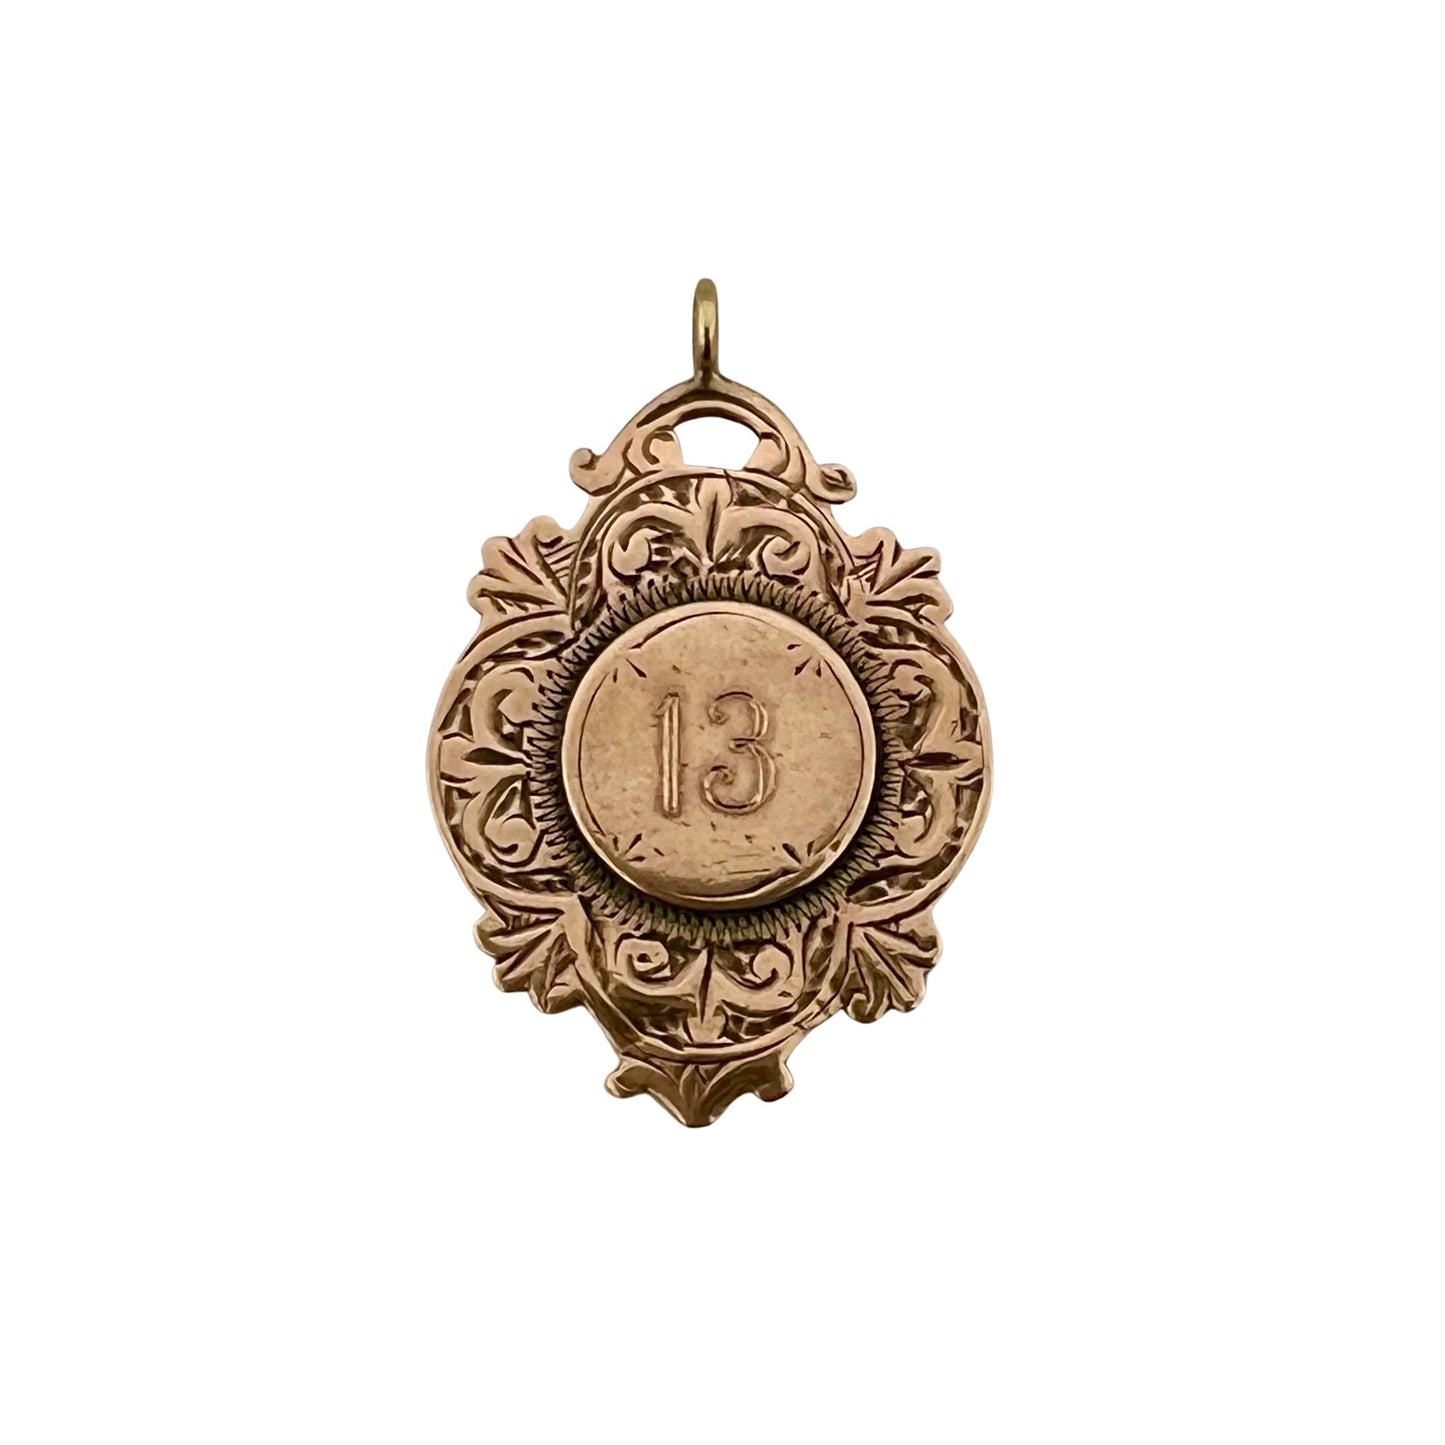 reimagined A N T I Q U E // lucky 13 / 9ct British rose gold fob with new engraving / a pendant